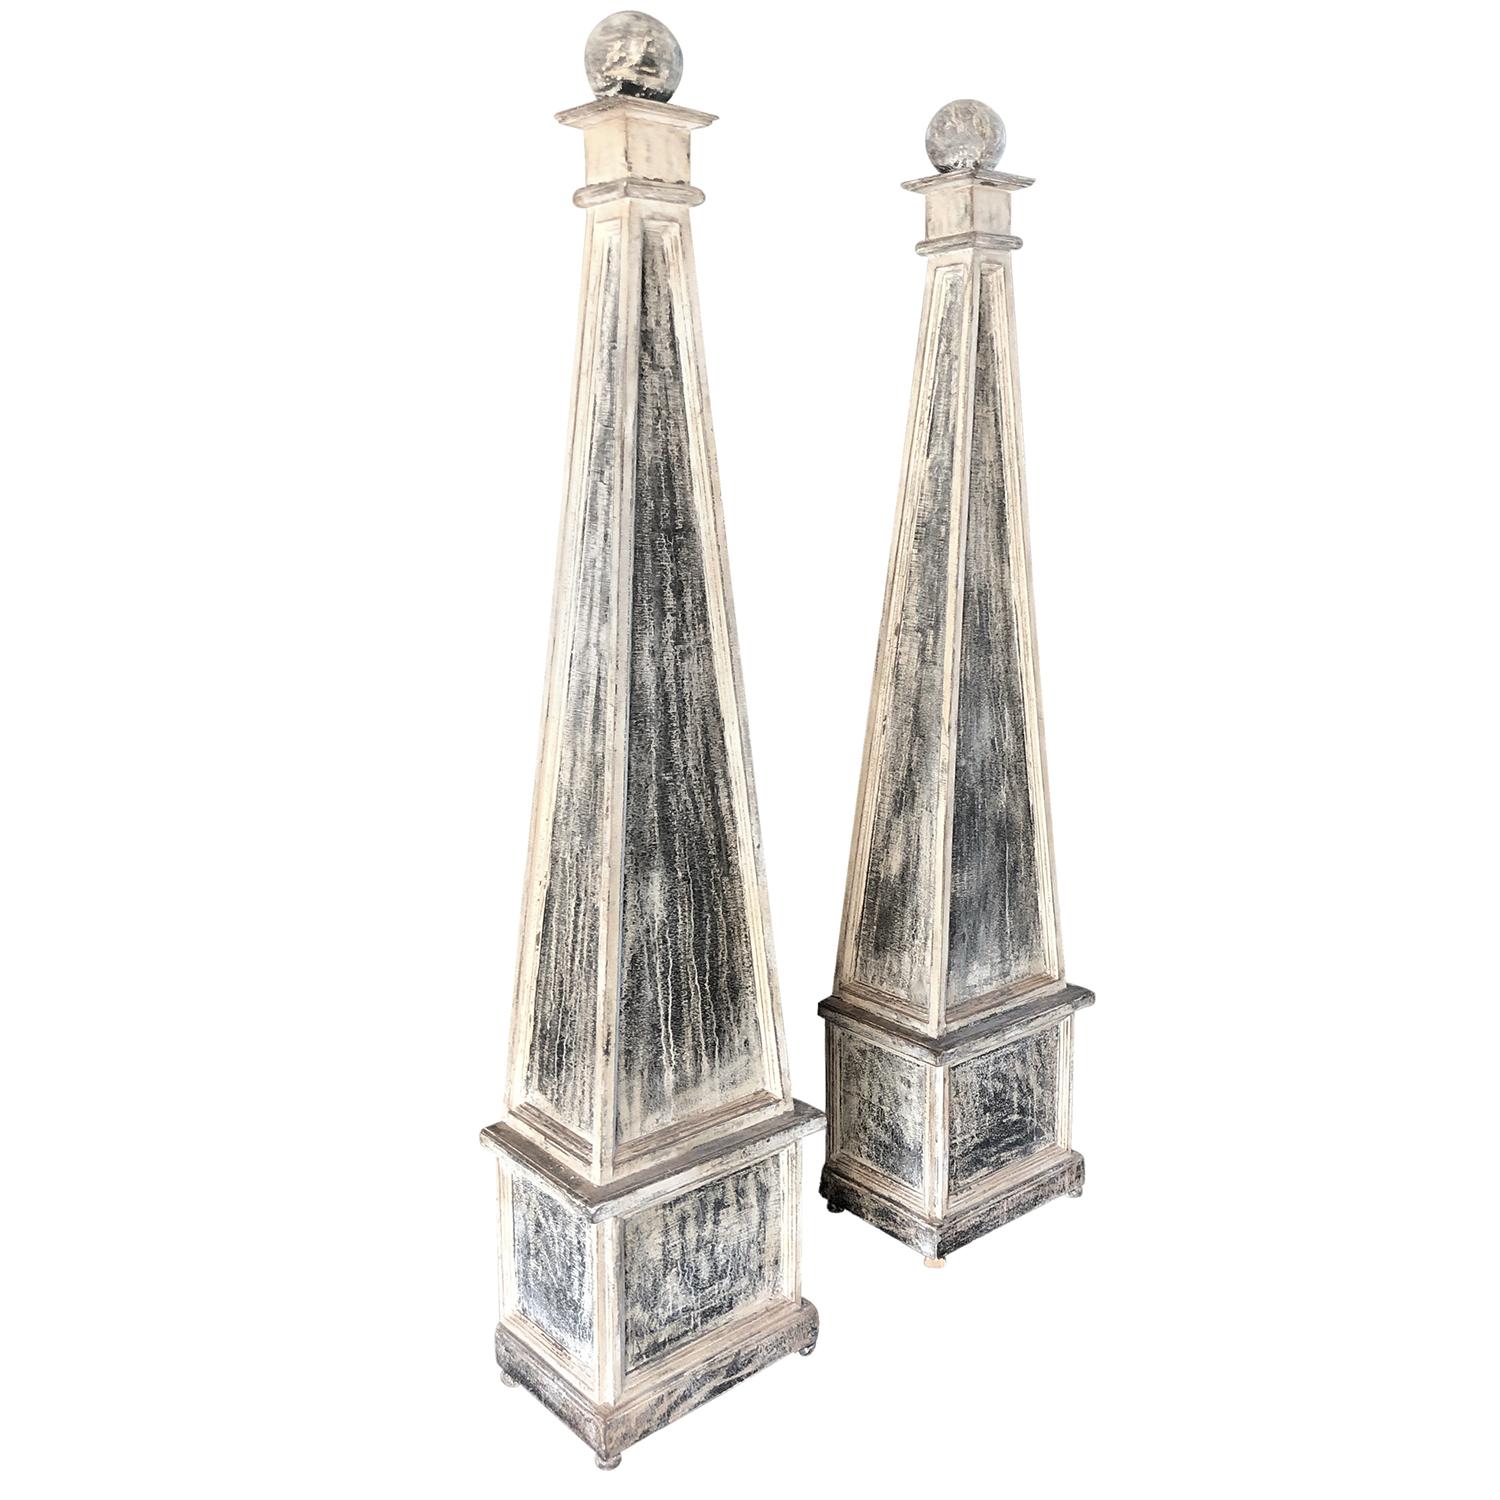 An antique pair of decorative Swedish Gustavian obelisks made of hand carved, grey pinewood and black scraped patina, in good condition. Wear consistent with age and use, circa 1880, Stockholm, Sweden, Scandinavia.